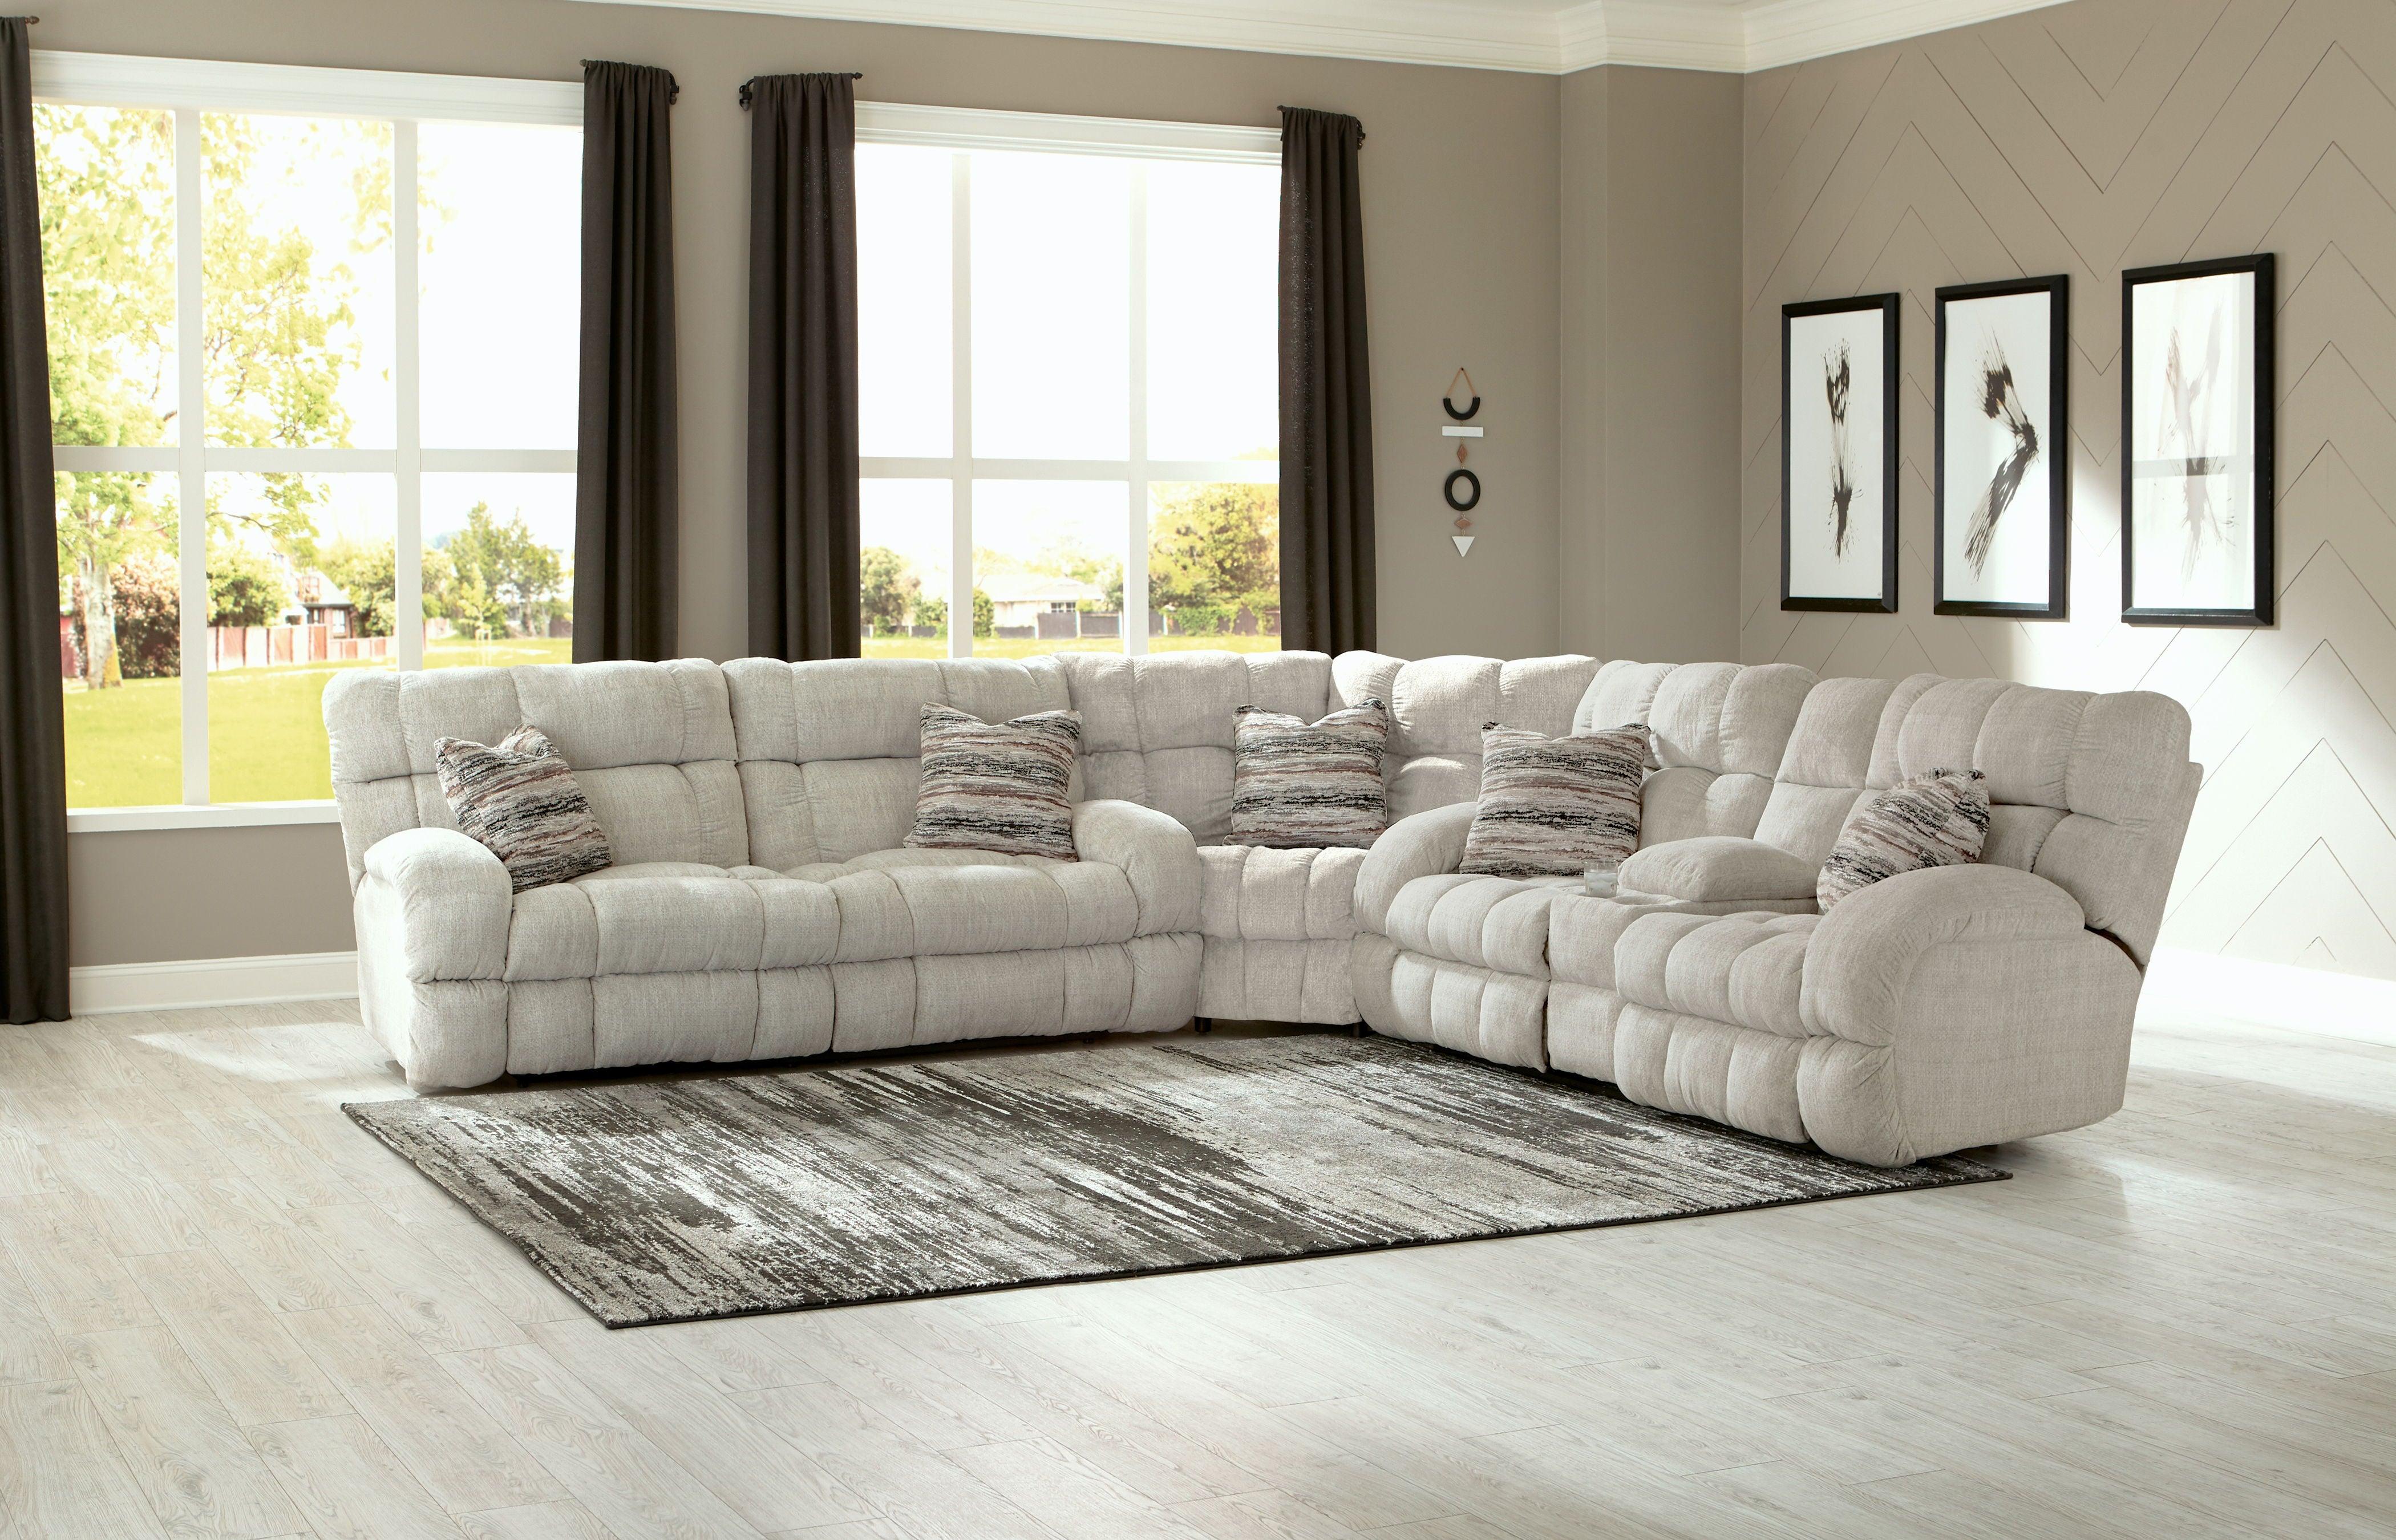 Catnapper - Ashland - Reclining Sectional With 4 Lay Flat Reclining Seats - 5th Avenue Furniture